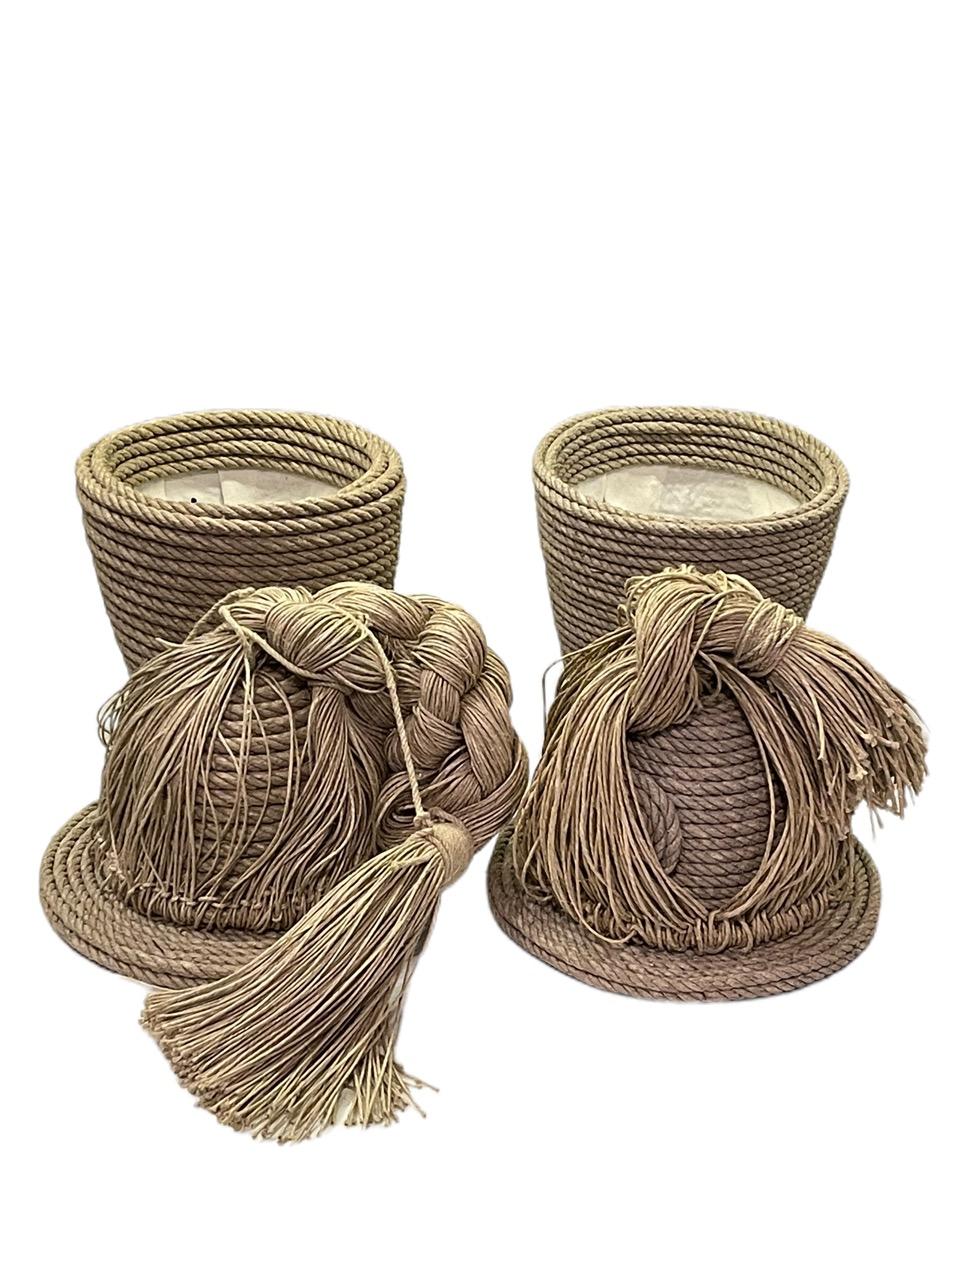 Hemp Pair of Contemporary 21st Century French Christian Astuguevieille Jute Rope Co For Sale